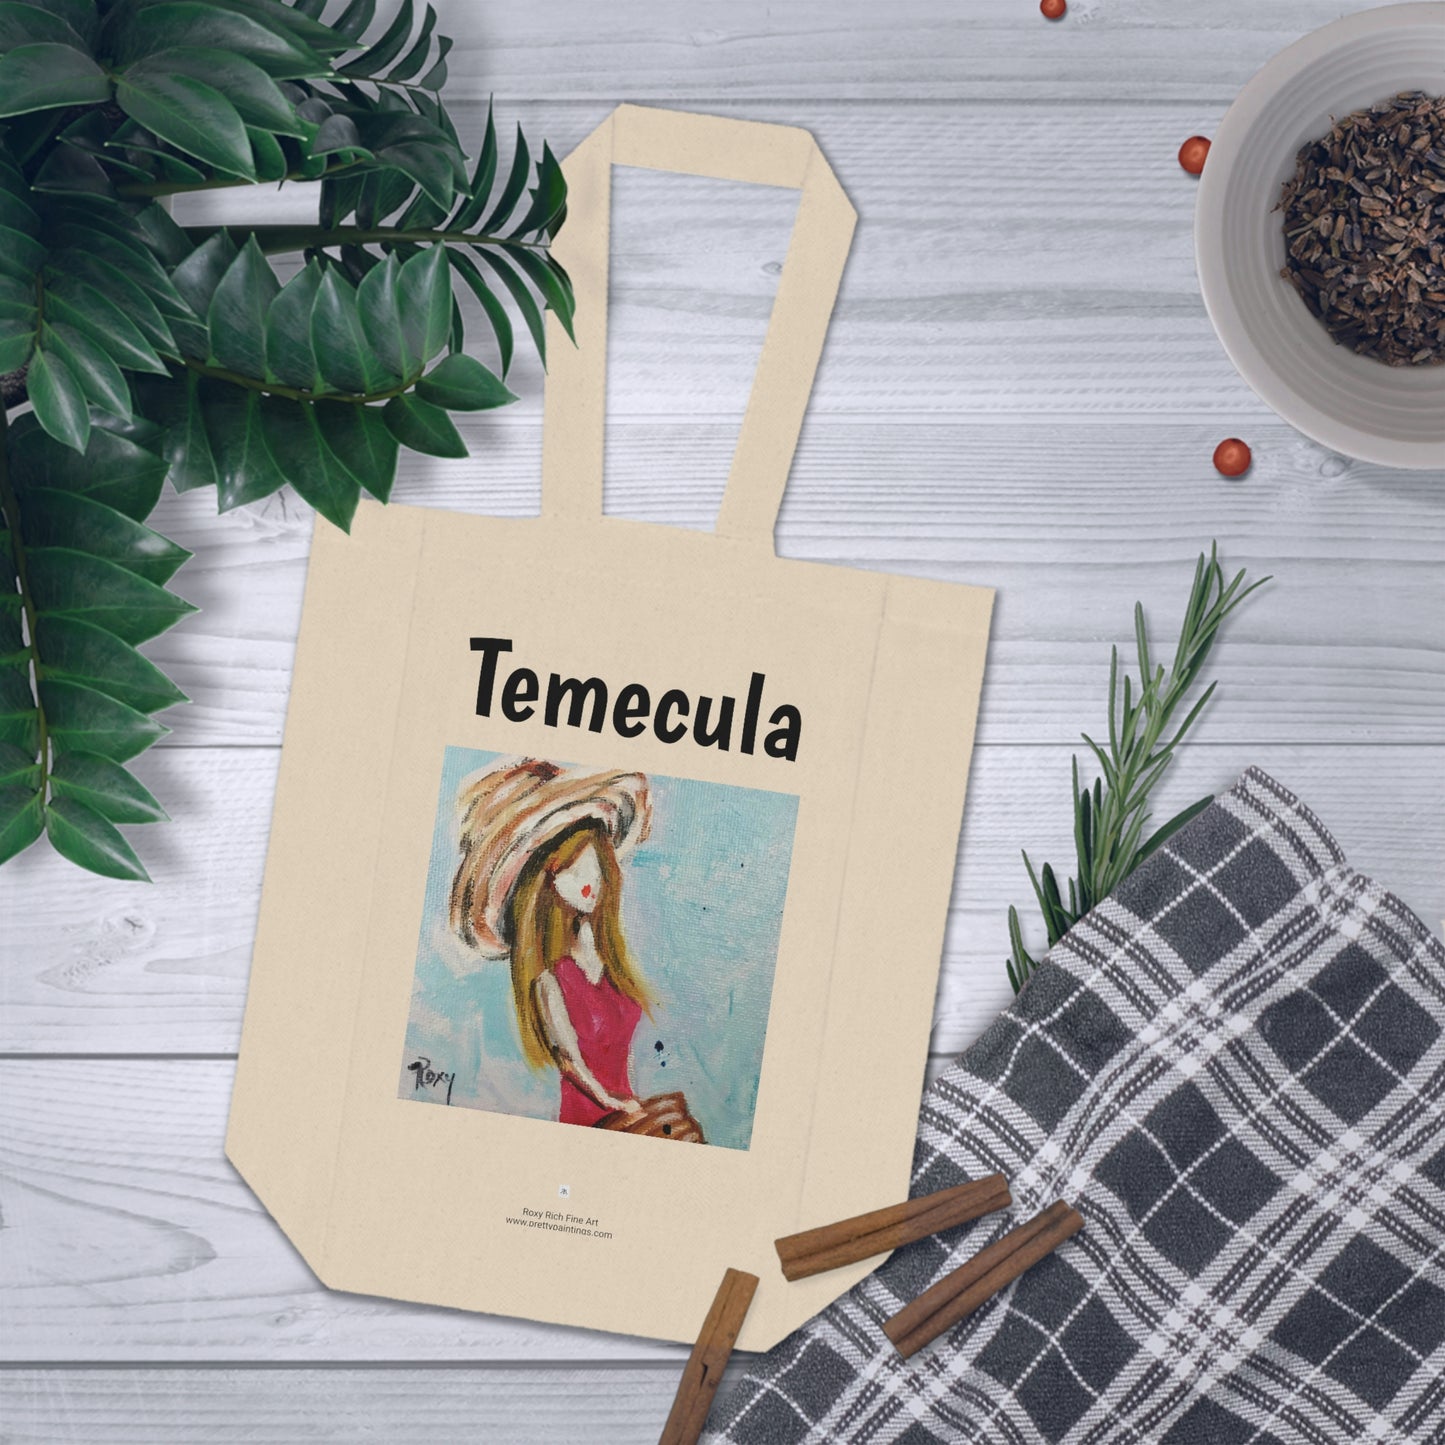 Temecula Double Wine Tote Bag featuring "Beach Babe" painting